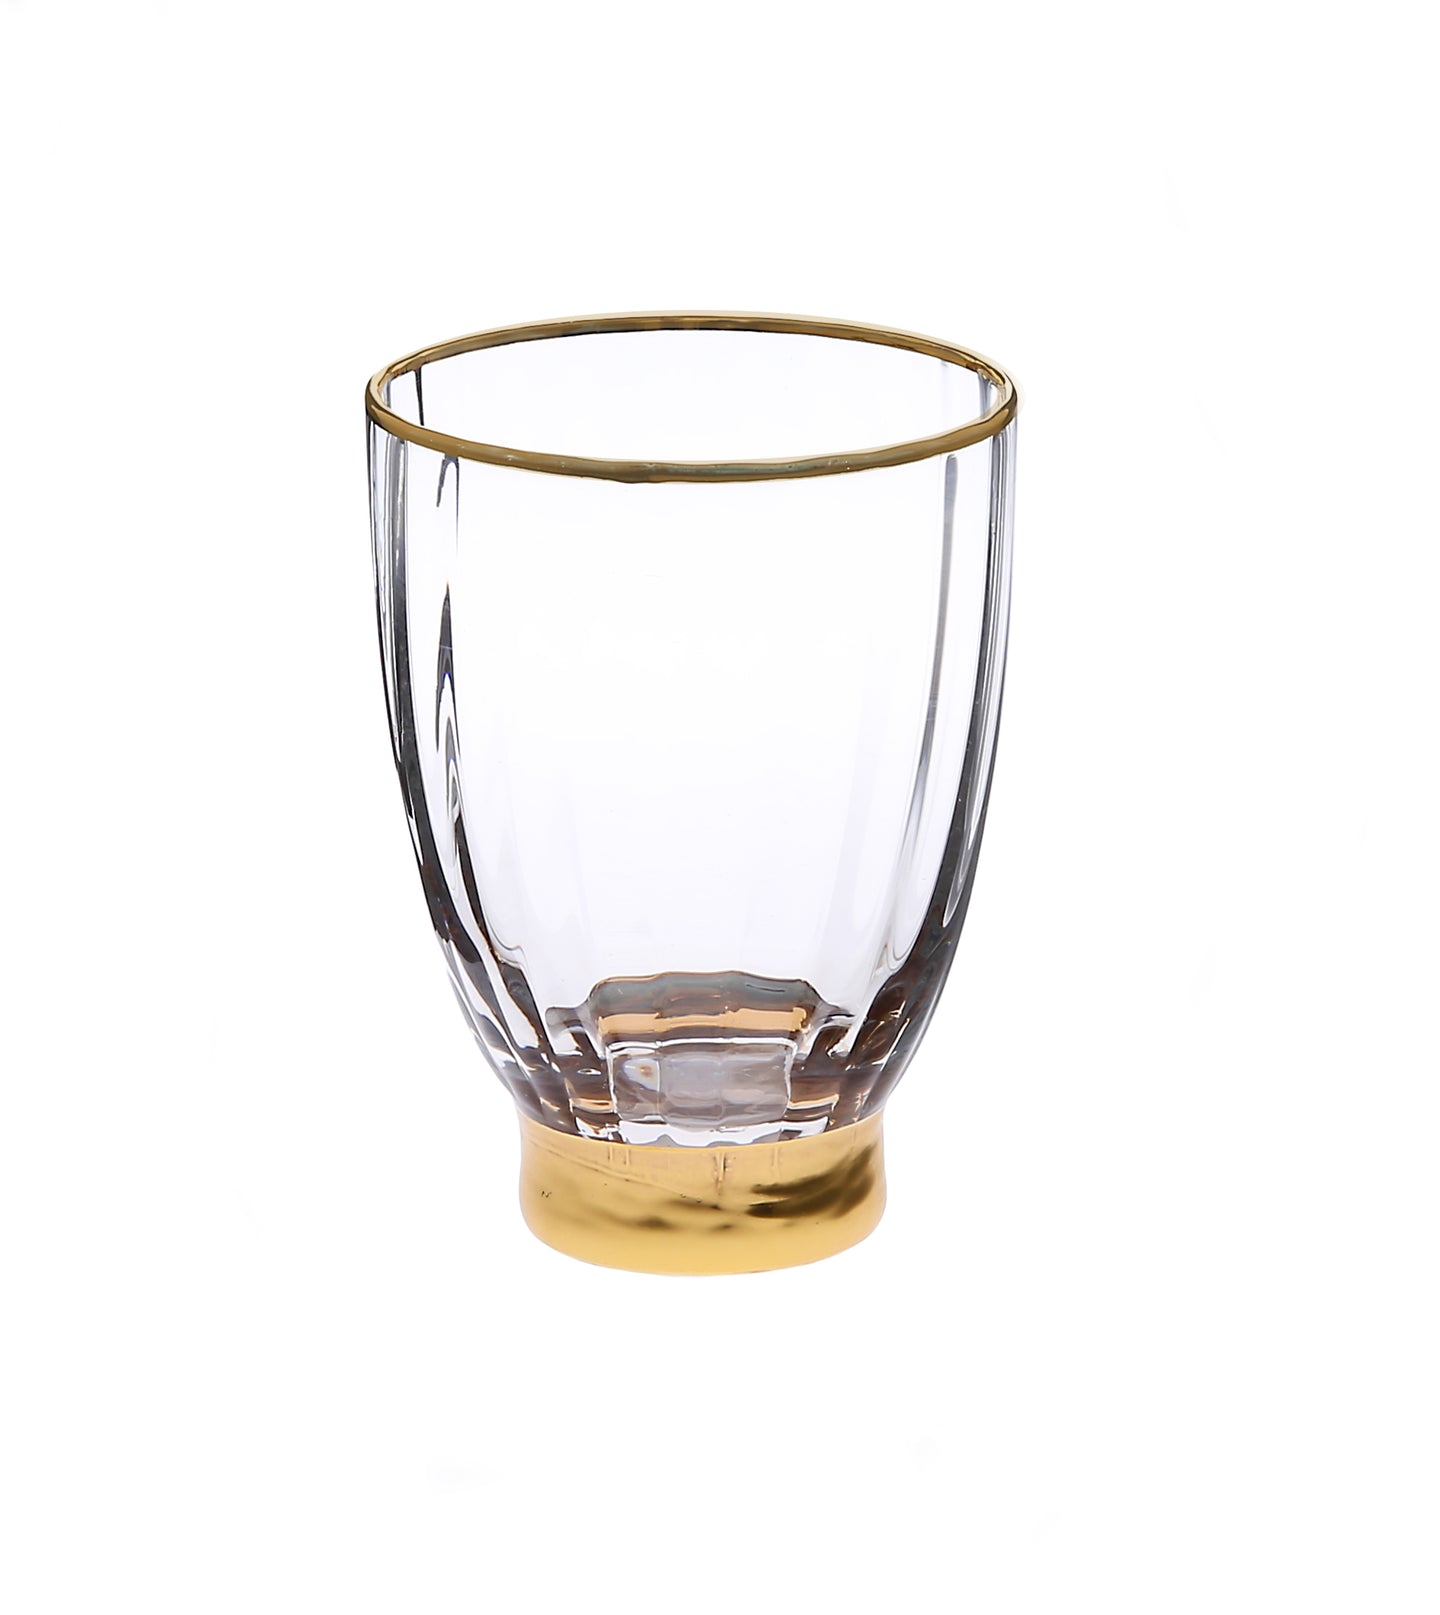 Set of 6 Line Textured Stemless Wine Glasses with Gold Base and Rim